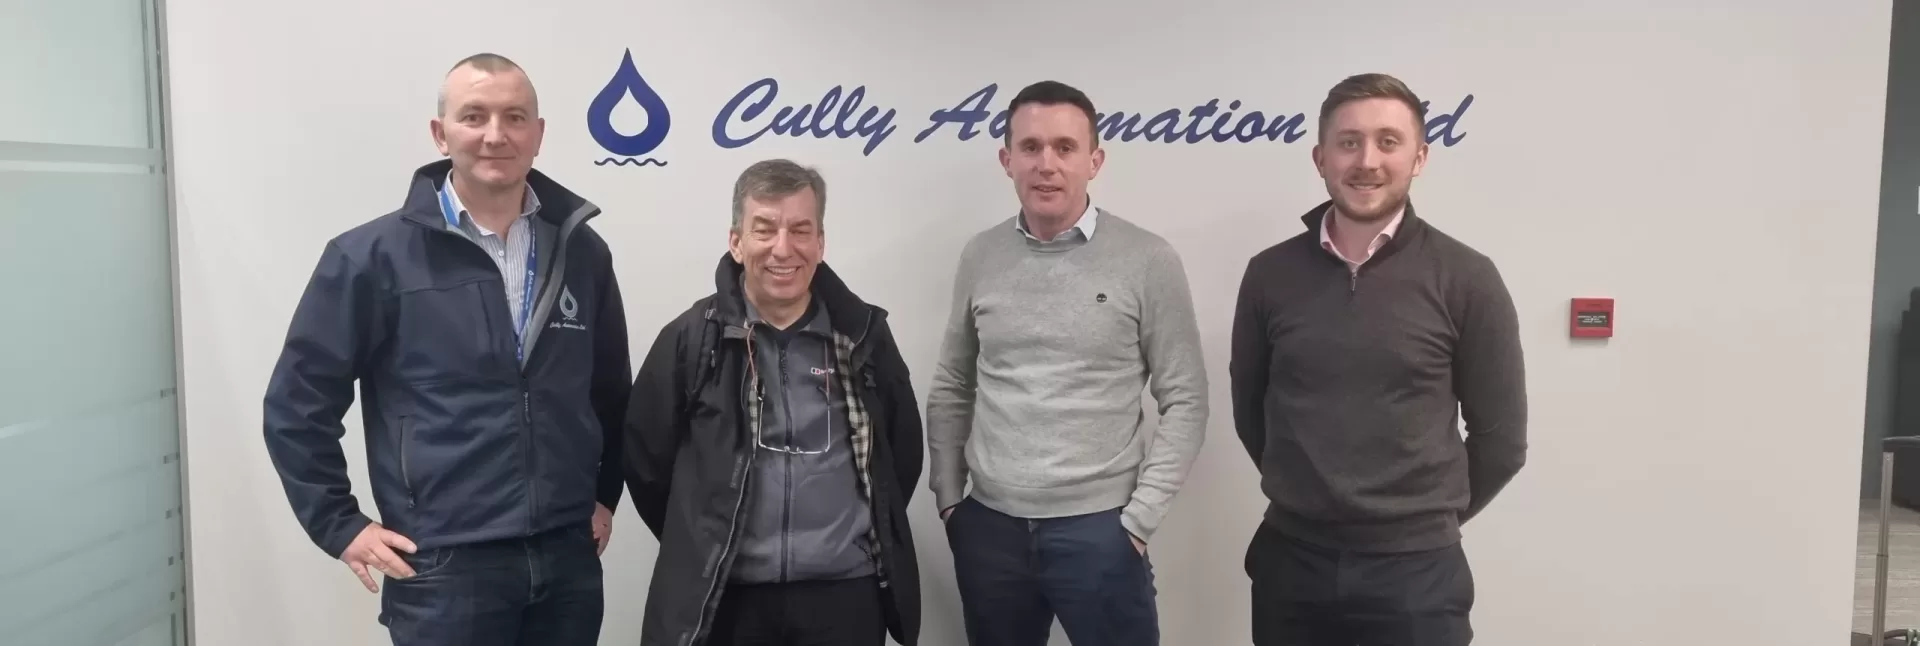 Diehl Metering and Cully Automation Ltd. partnership